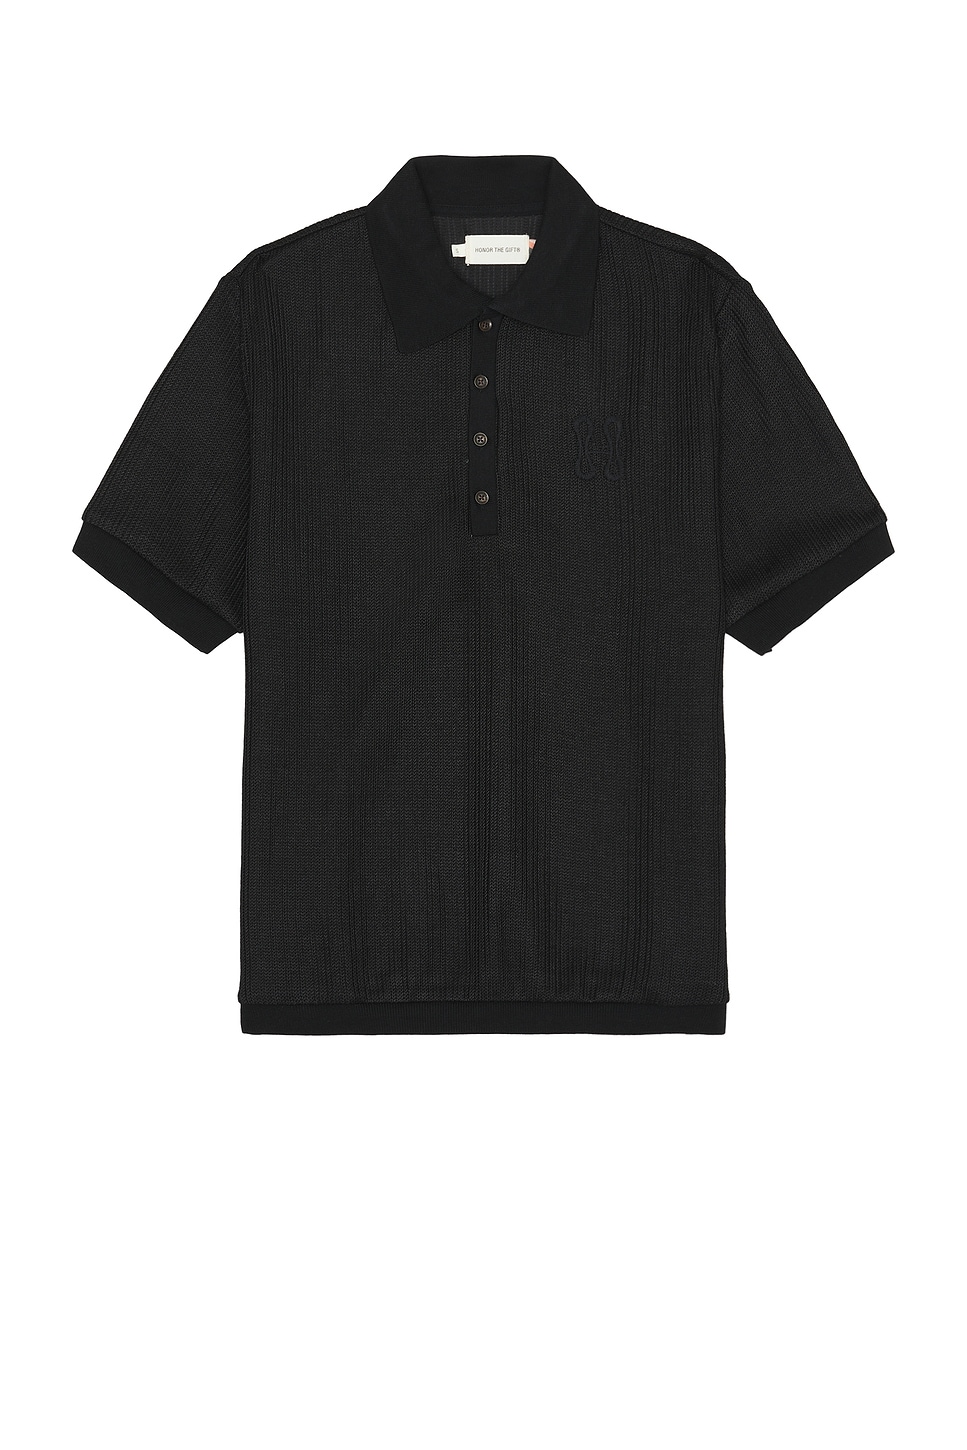 Image 1 of Honor The Gift Knit Polo in Black